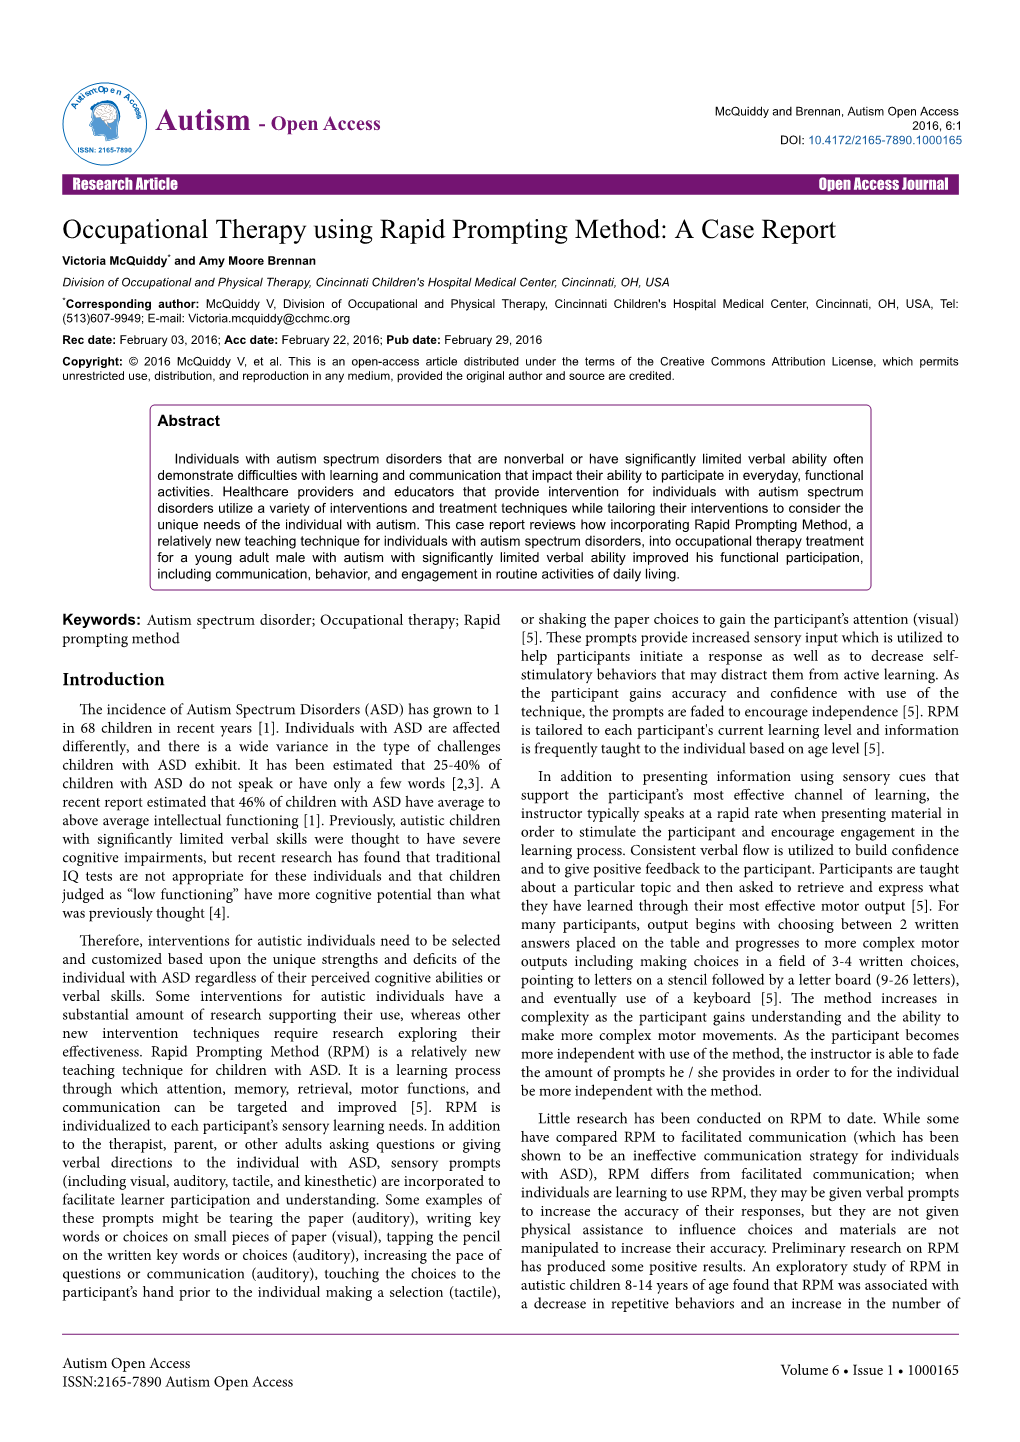 Occupational Therapy Using Rapid Prompting Method: a Case Report